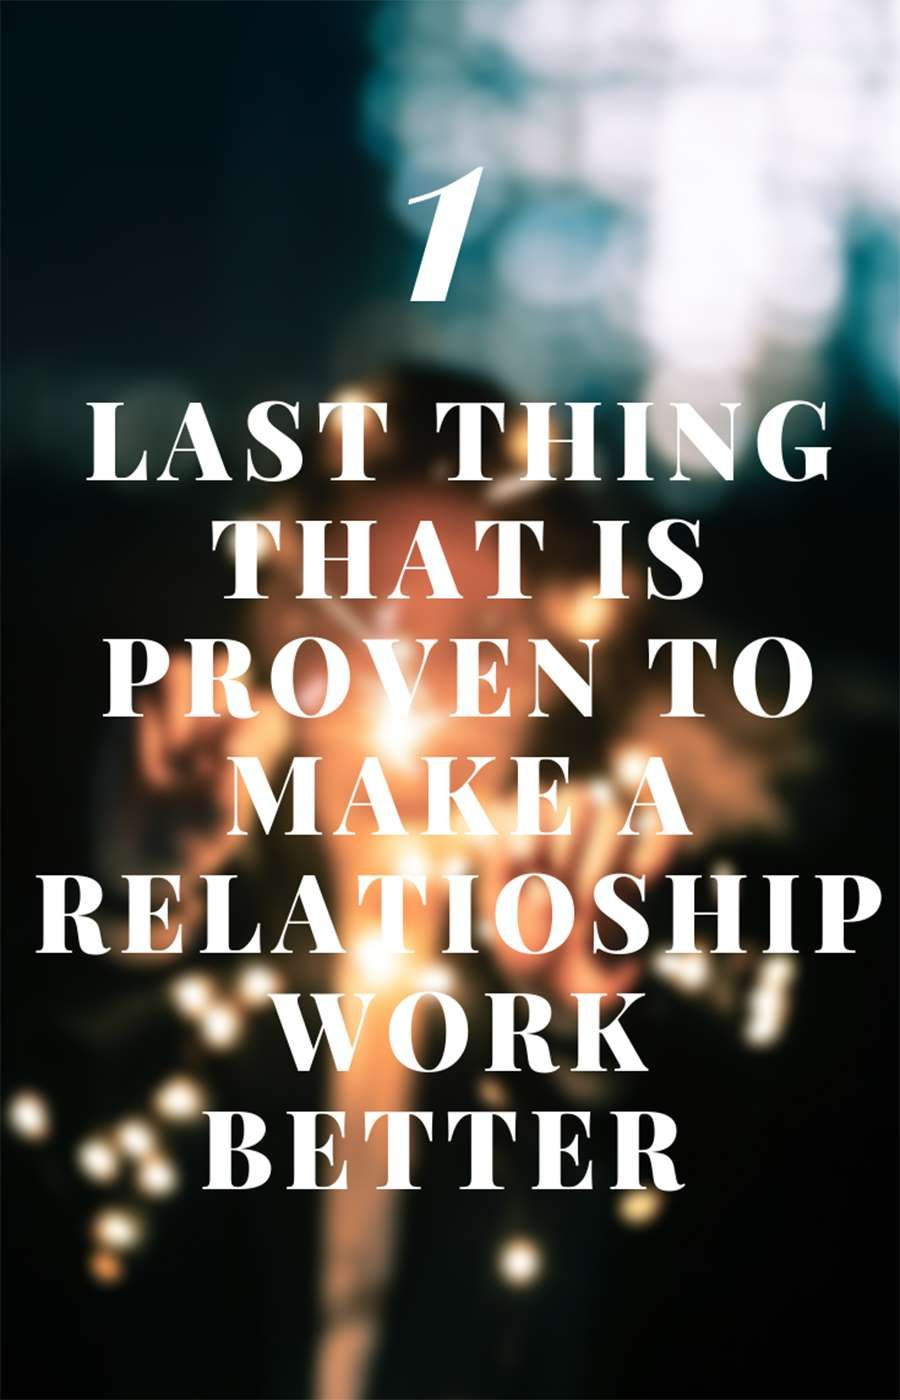 Making Relationships Work Quotes
 How To Make A Relationship Work